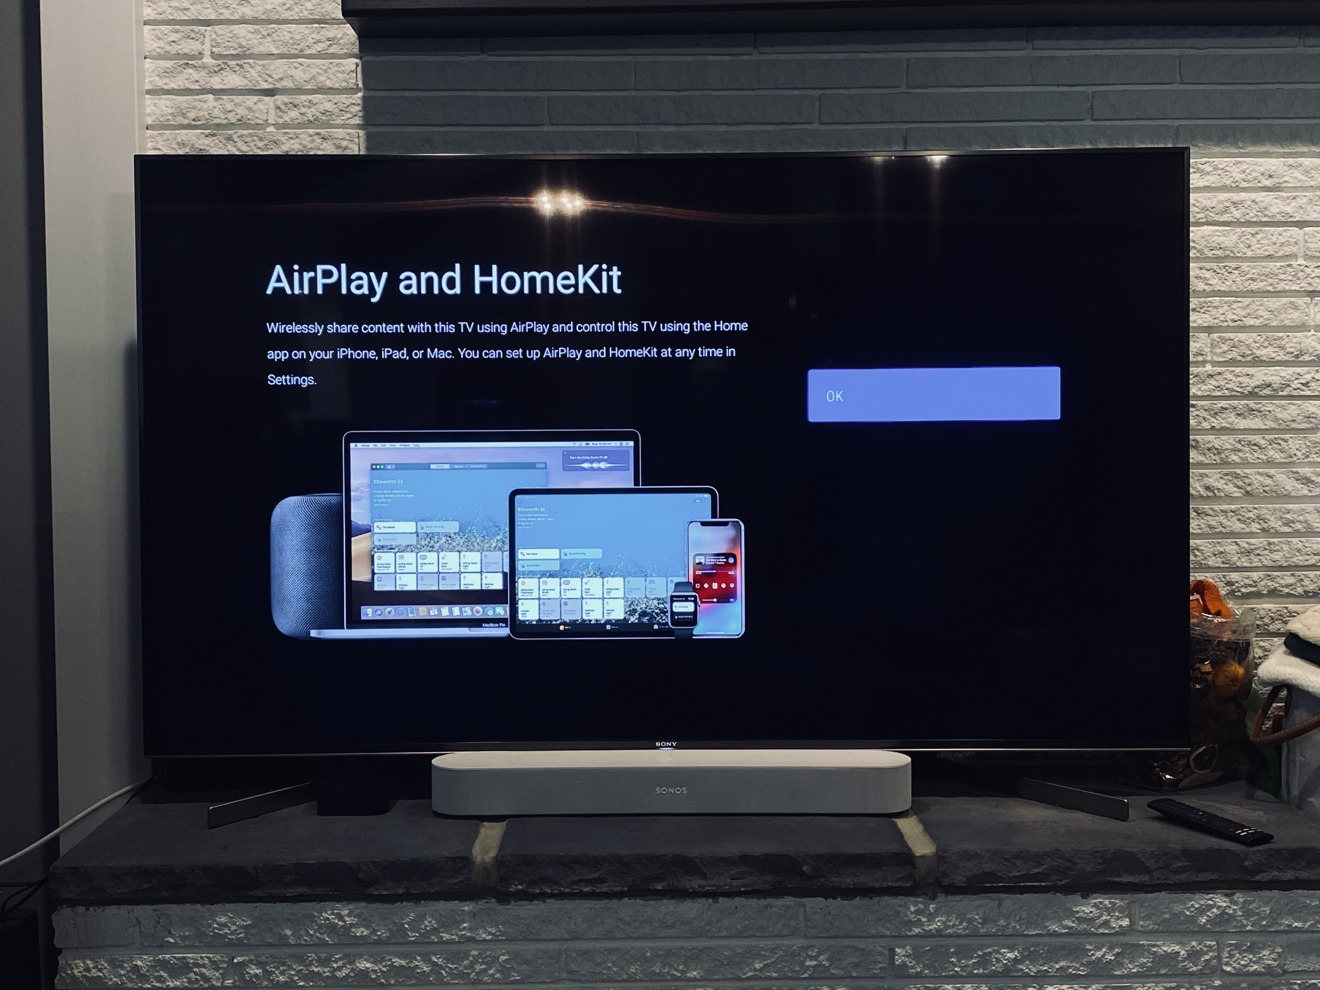 Hot And Airplay 2 On Sony Smart Tvs, Screen Mirror Iphone To Sony Bravia Smart Tv